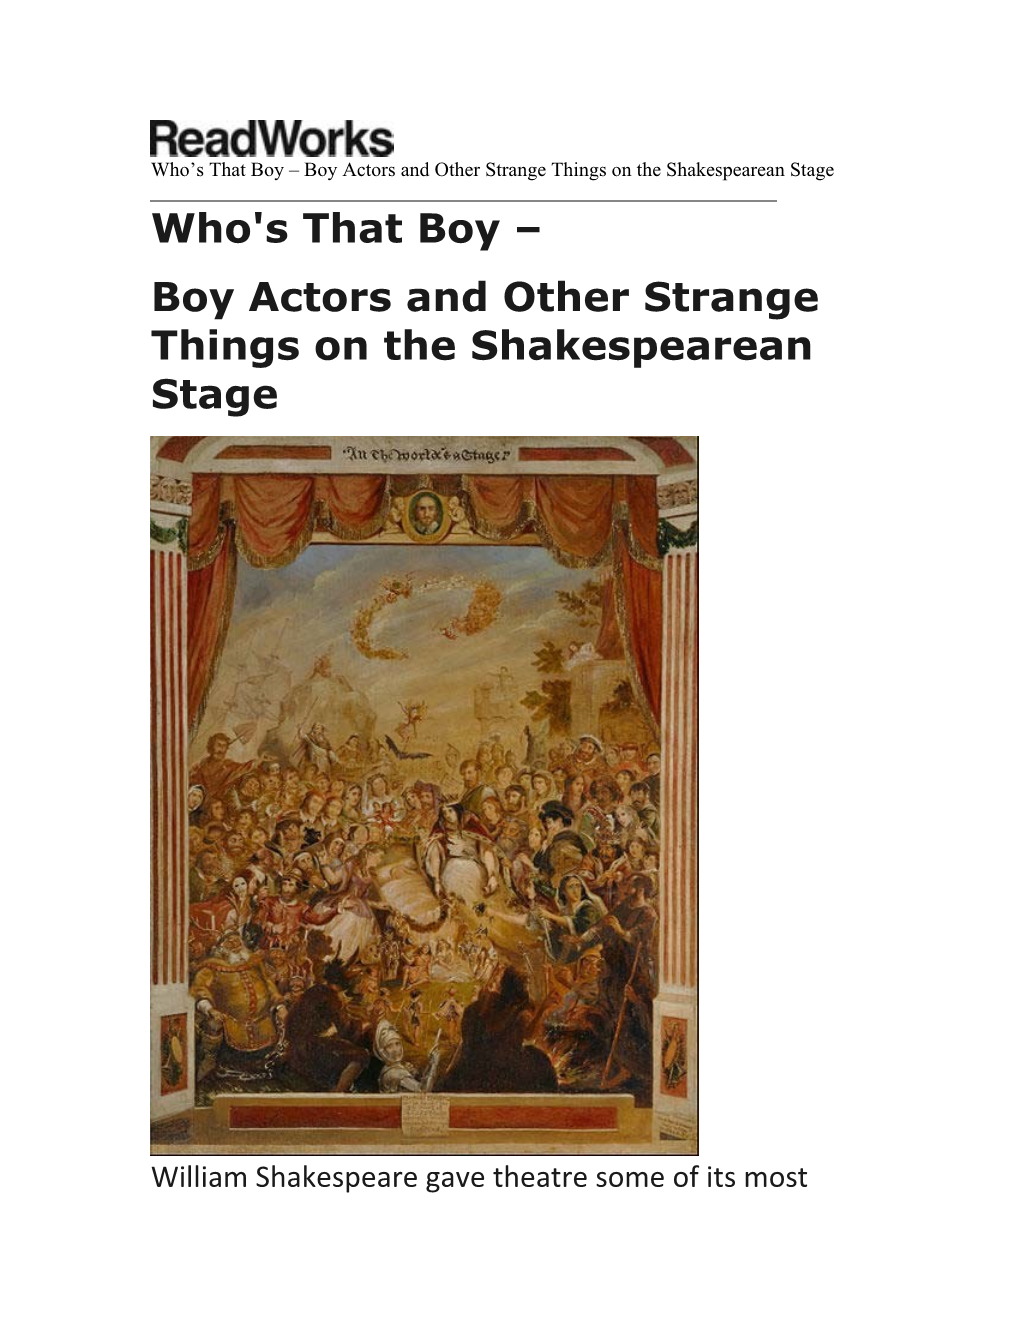 Boy Actors and Other Strange Things on the Shakespearean Stage